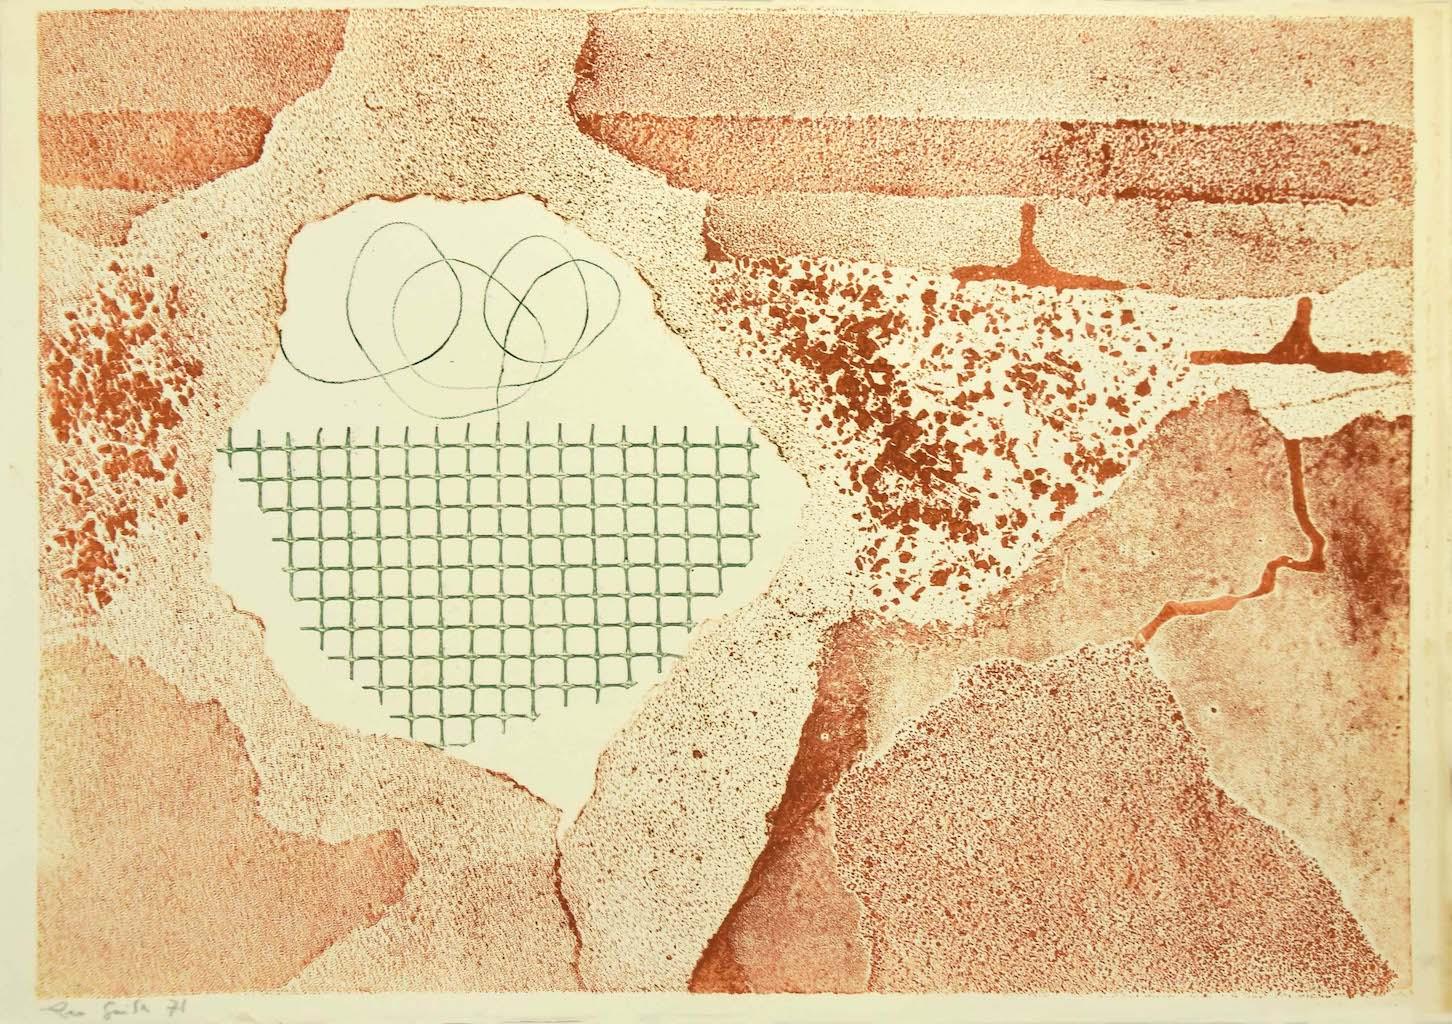 Composition is an original colored etching artwork on cardboard realized by Leo Guida in 1971.

Hand-signed in pencil and dated on the lower left.

The state of preservation is good except for some foxings along the margins.

The artwork represents